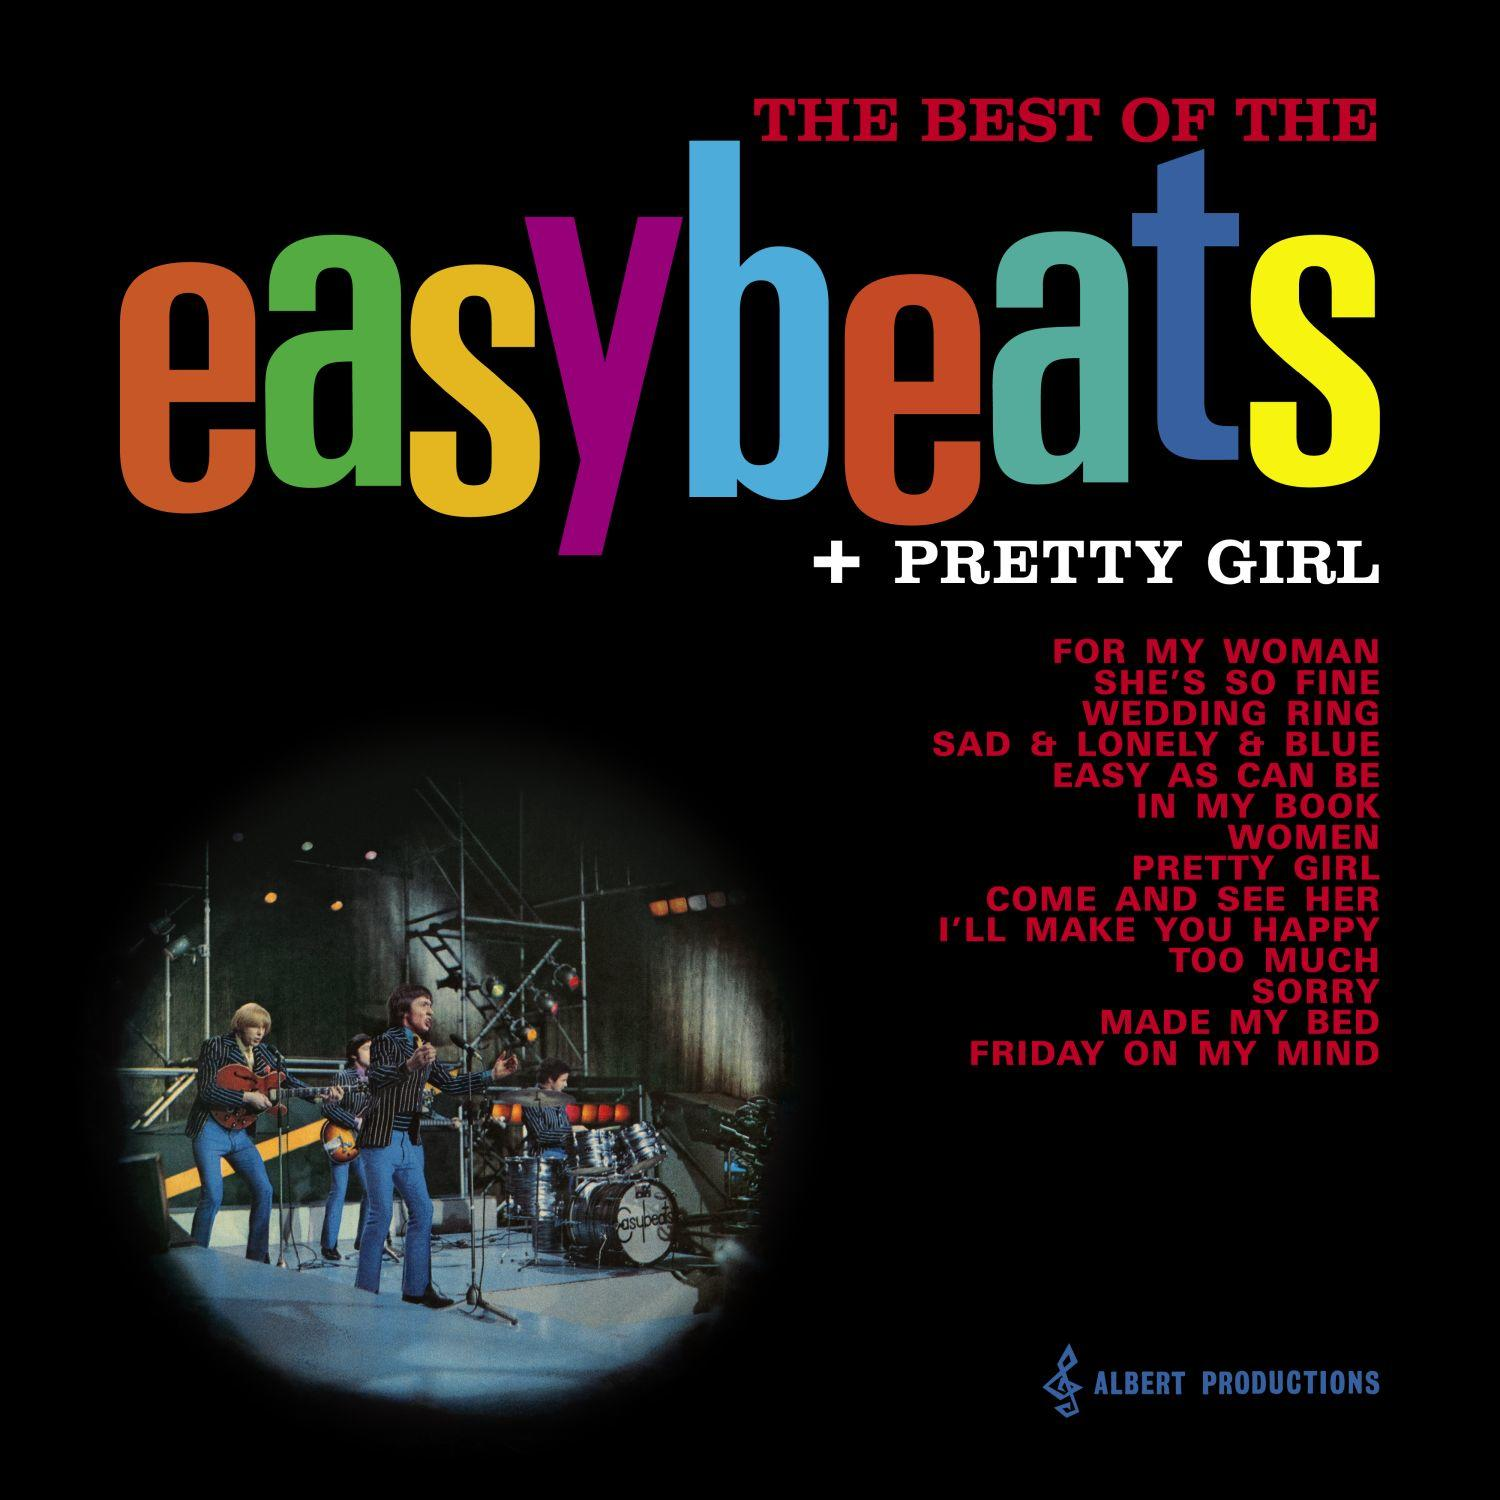 The Easybeats+Pretty Best (CD) Girl Easybeats The Of - The -